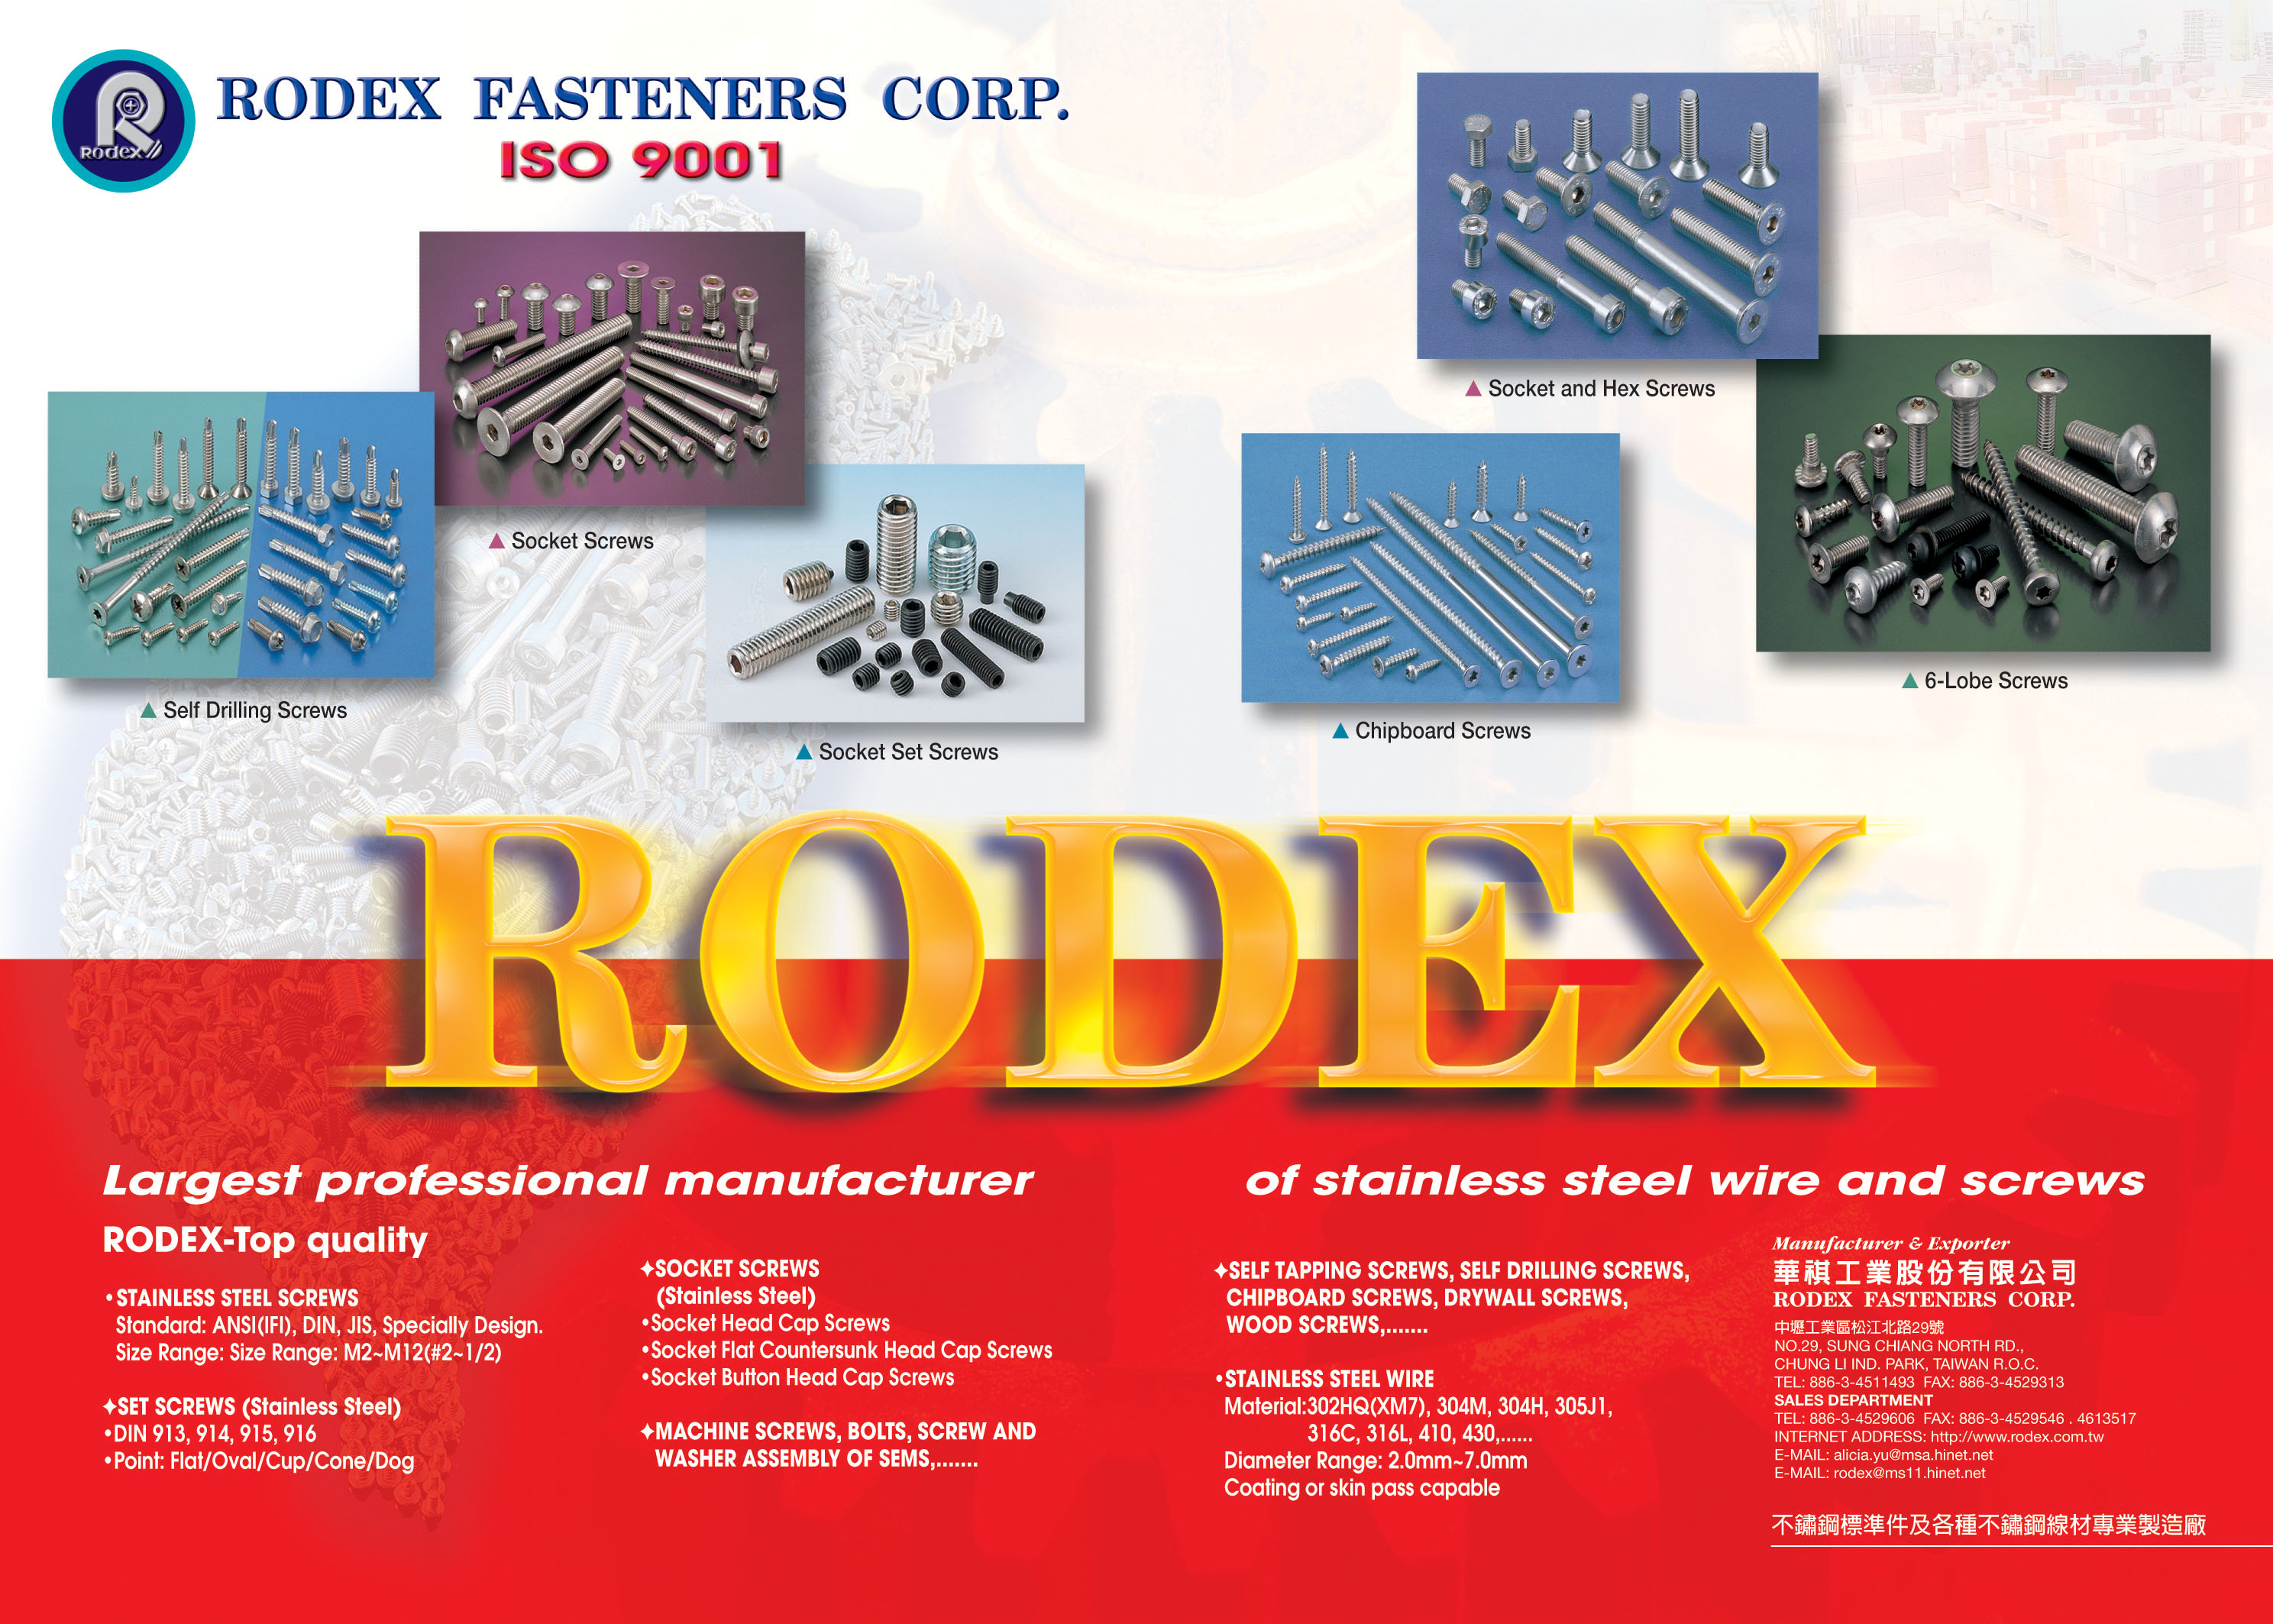 RODEX FASTENERS CORP. Online Catalogues